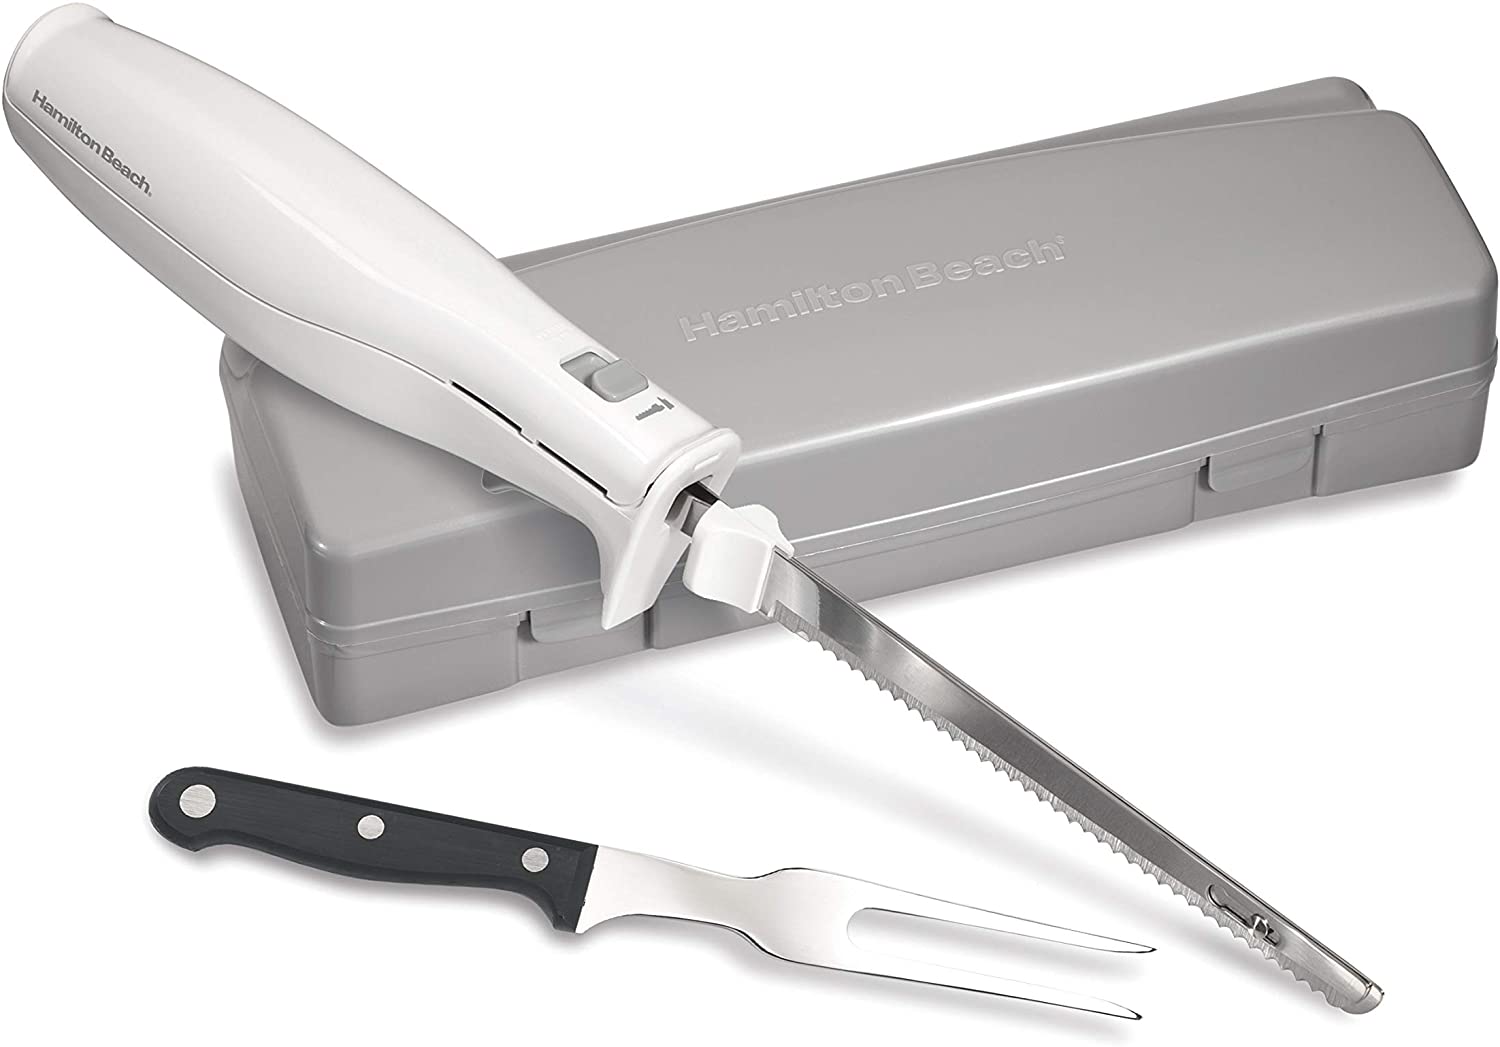 Hamilton Beach Electric Knife for Carving Meats, Poultry, Bread, Crafting Foam & More, Storage Case & Serving Fork Included, White